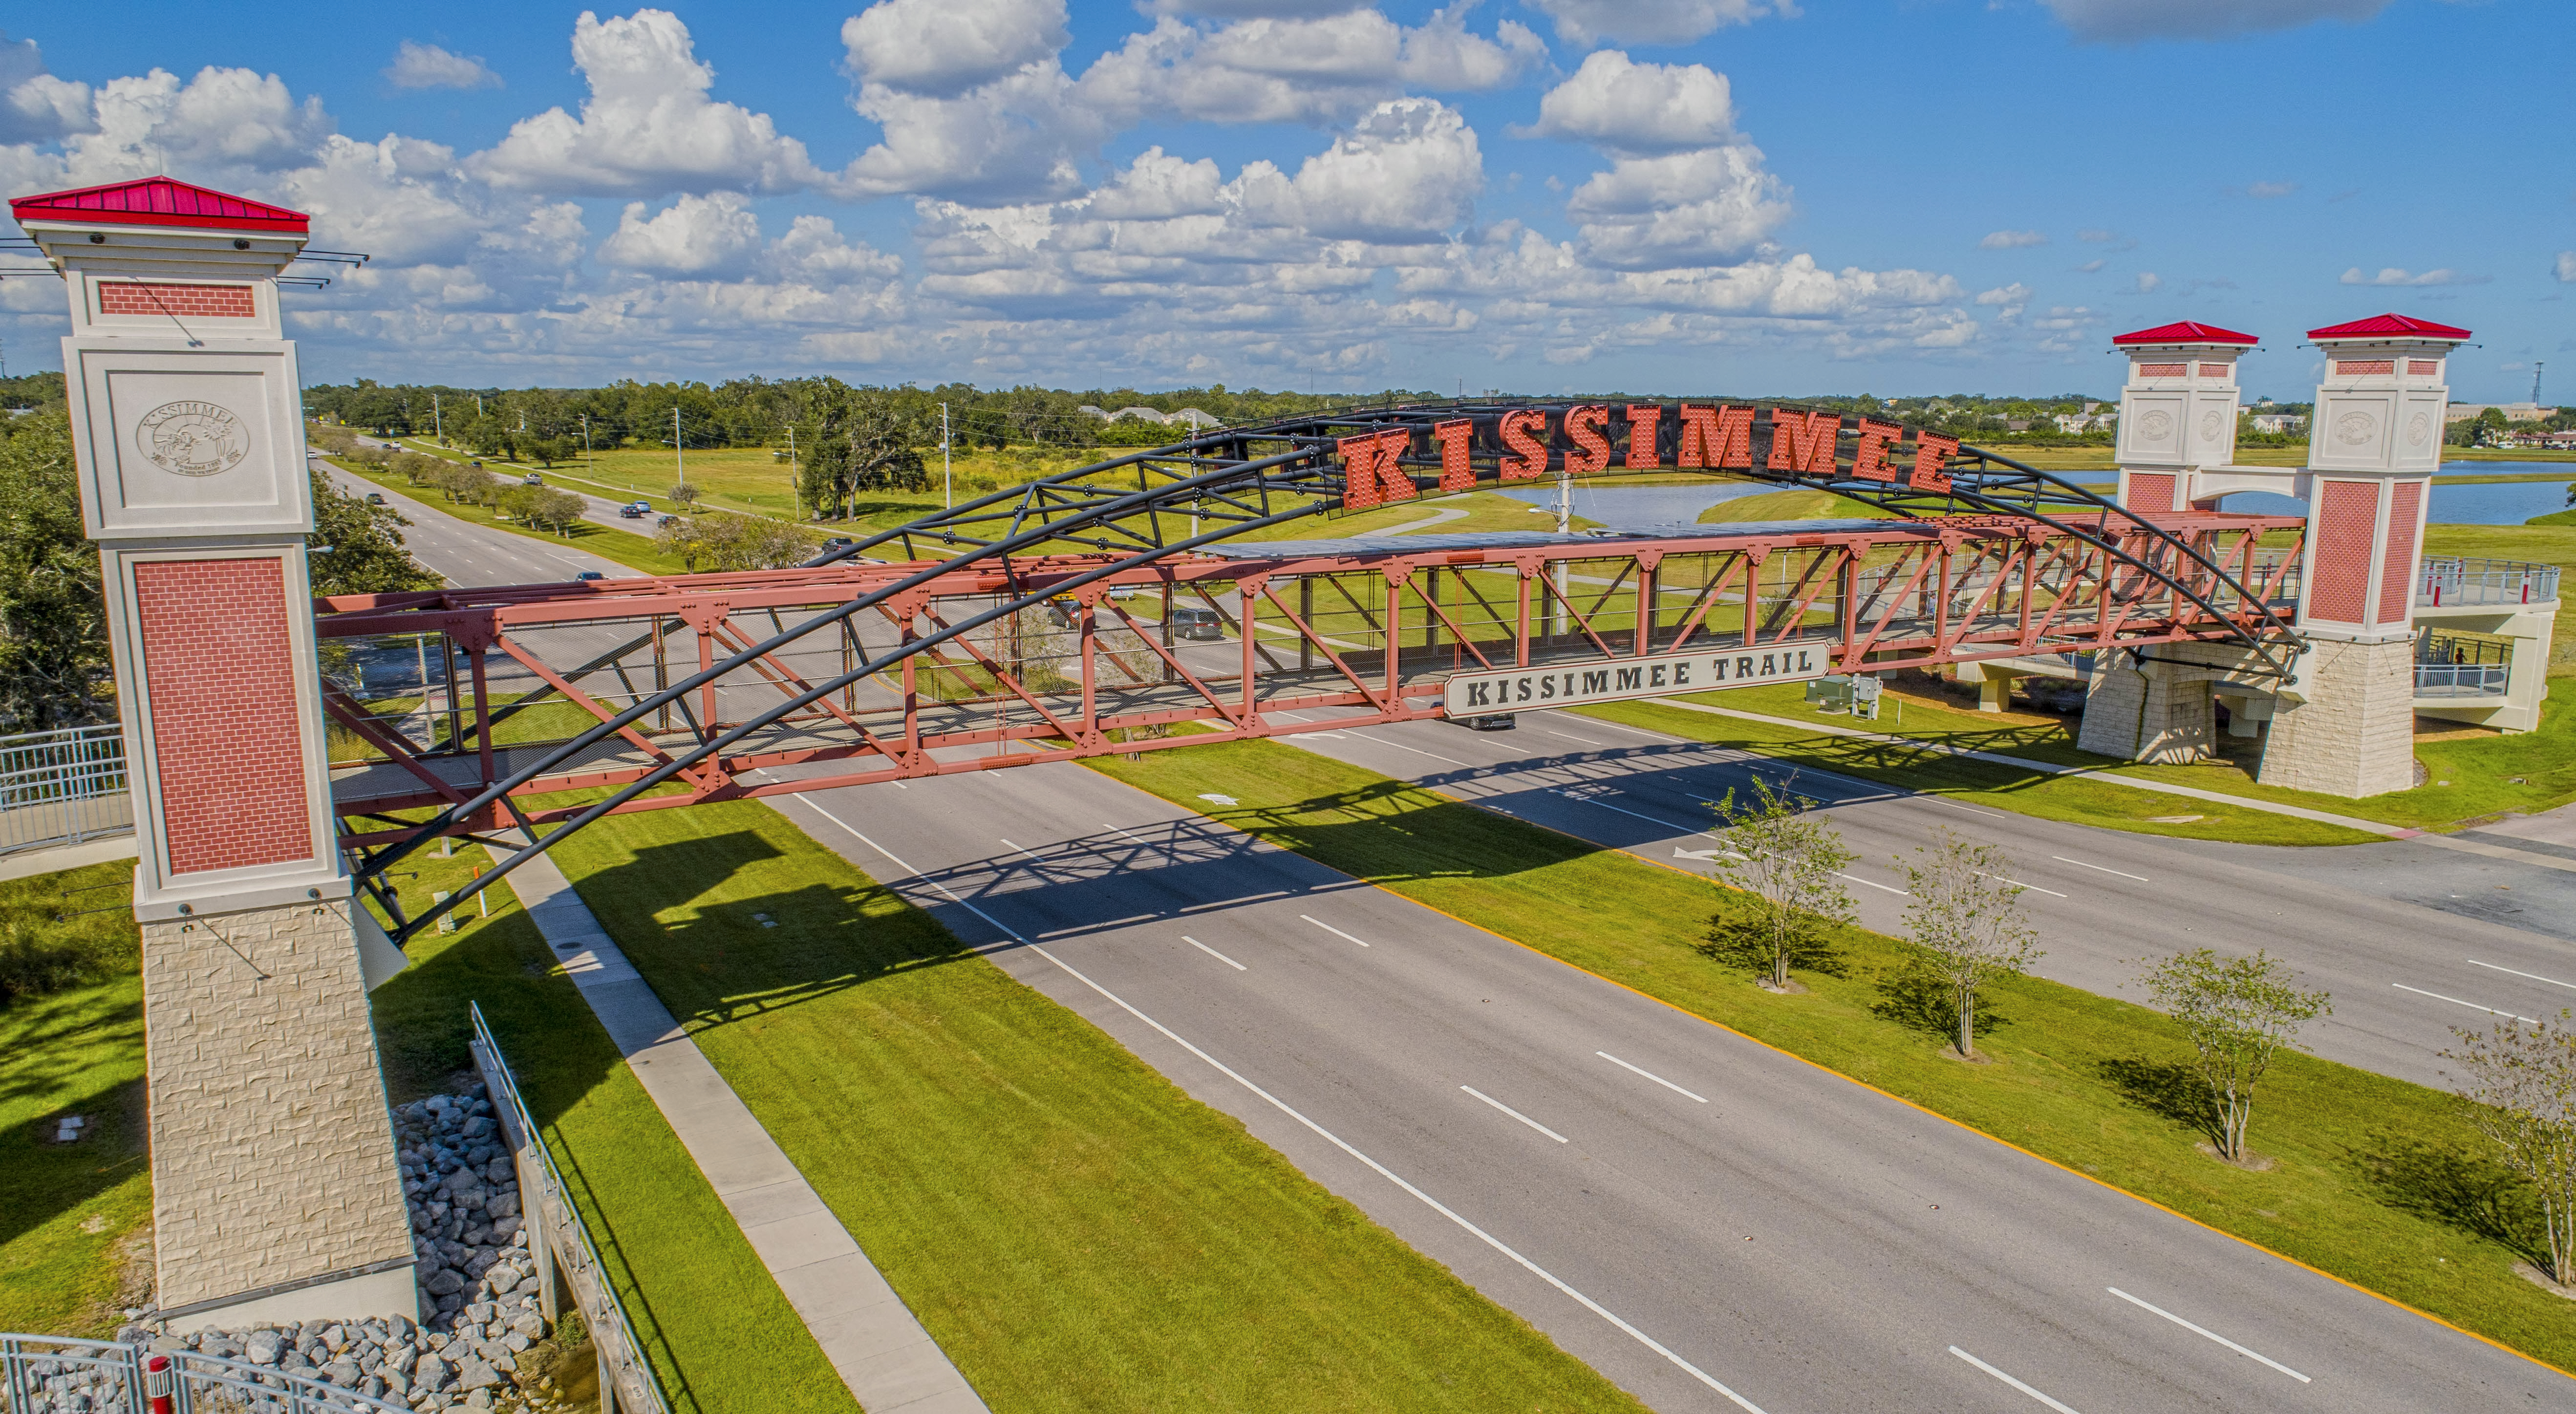 This is a photo of the pedestrian bridge on the Kissimmee Loop Trail